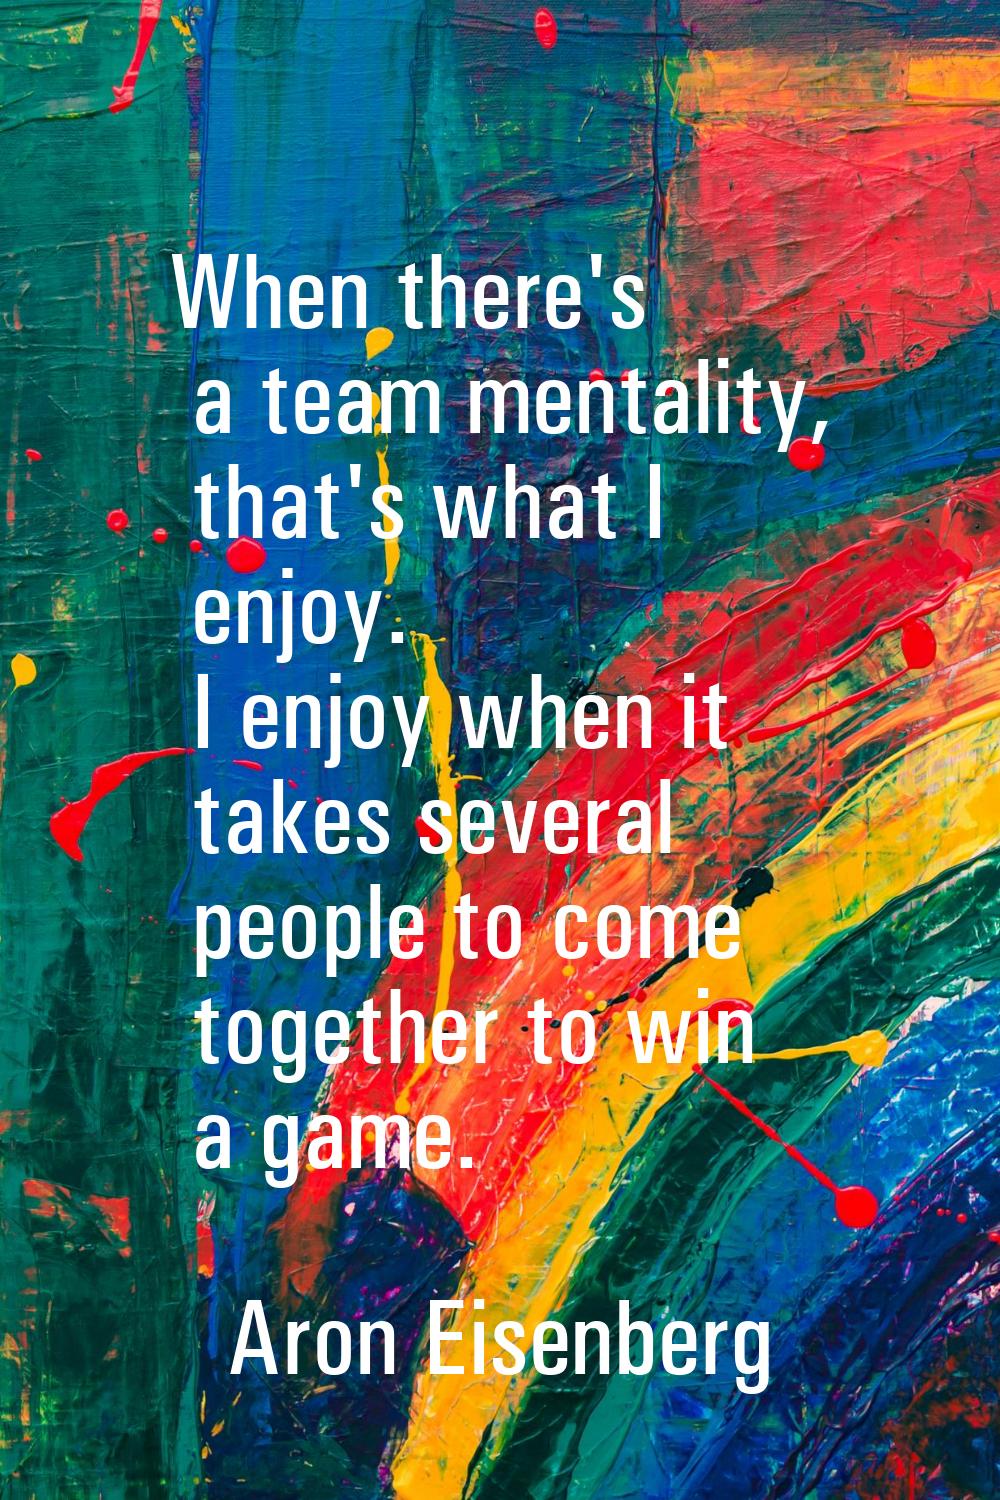 When there's a team mentality, that's what I enjoy. I enjoy when it takes several people to come to